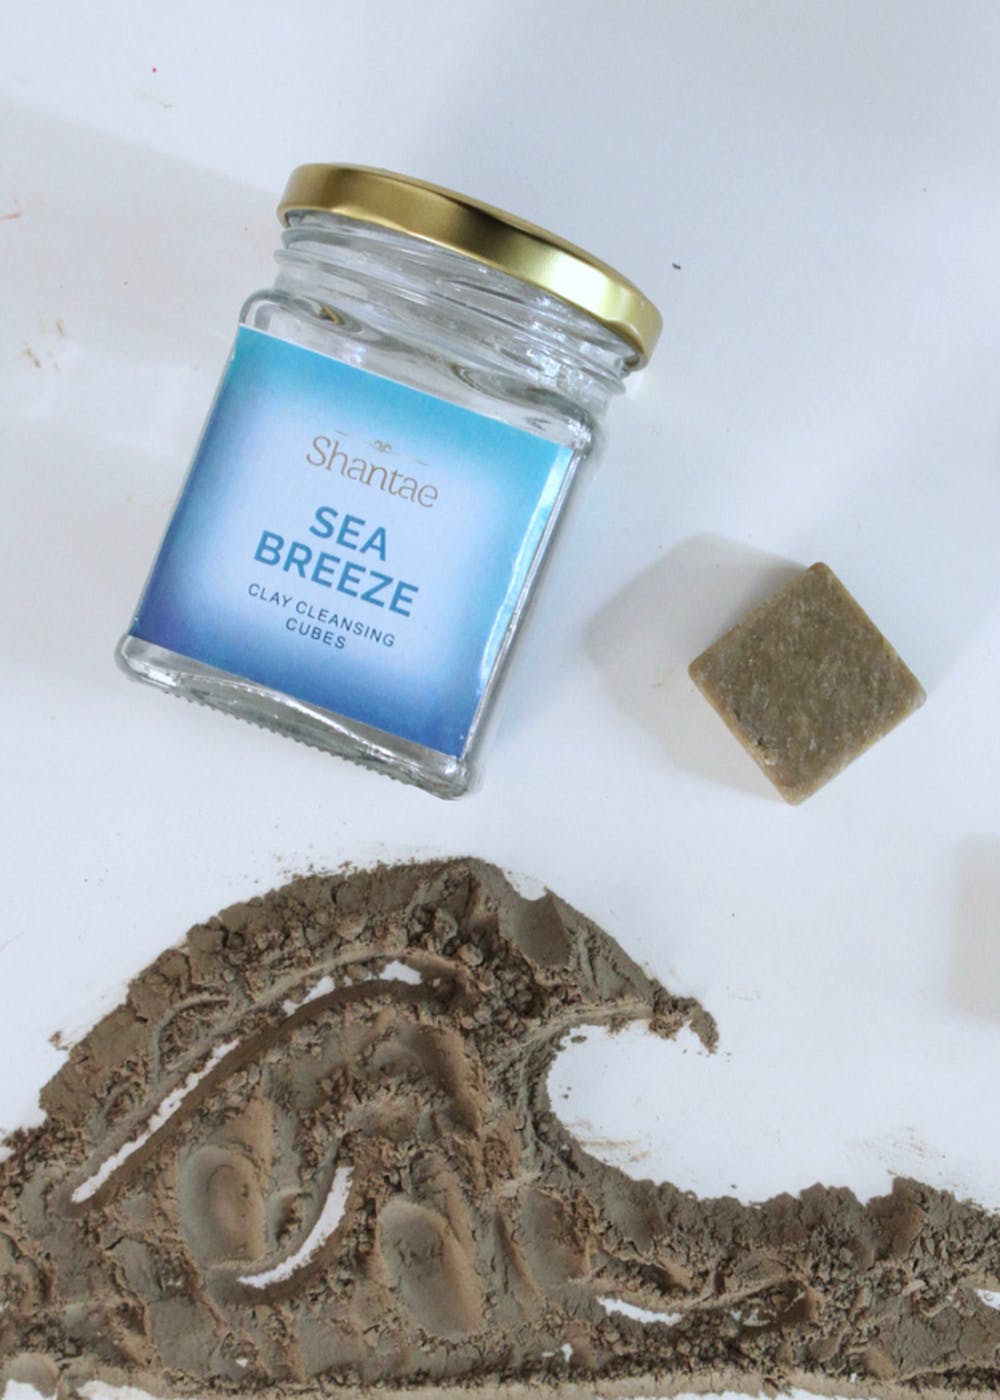 Clay Cleansing Cube-Sea Breeze - 75 gm